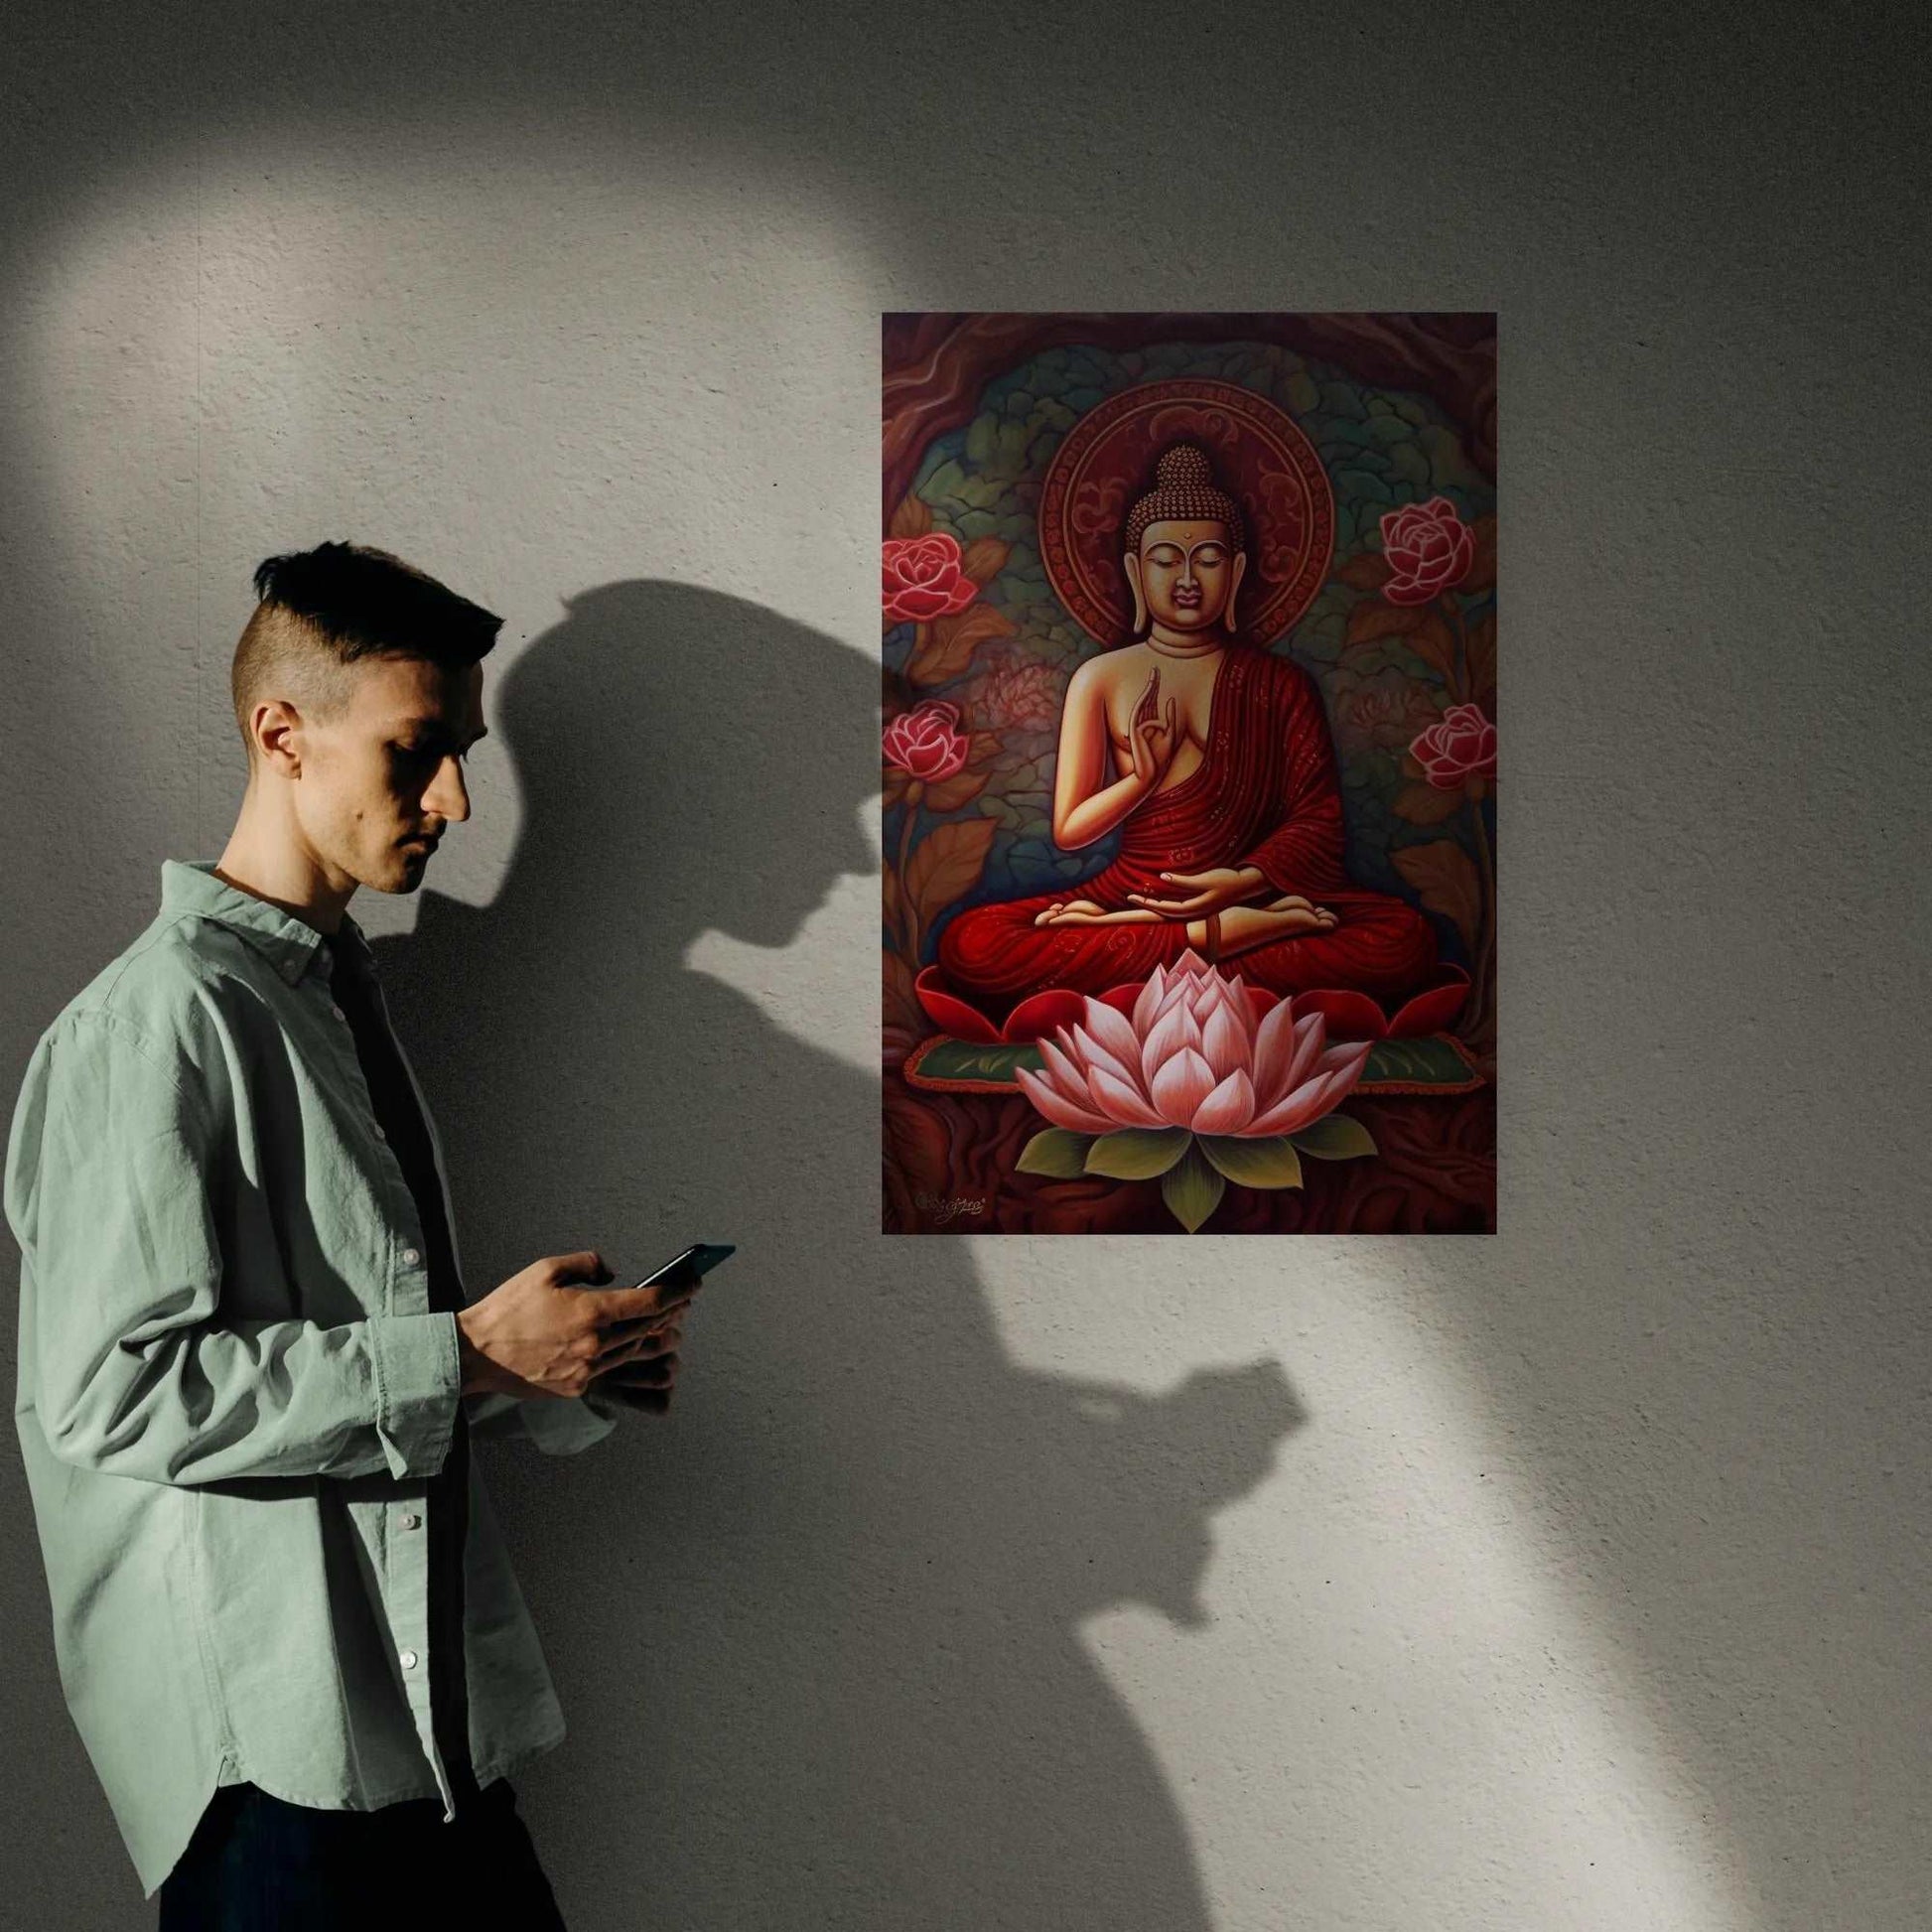 A person gazes at their phone beside a wall adorned with a seated Buddha painting in red and gold, showcasing a meditative Buddha over a blooming lotus, blending spirituality with modern life.